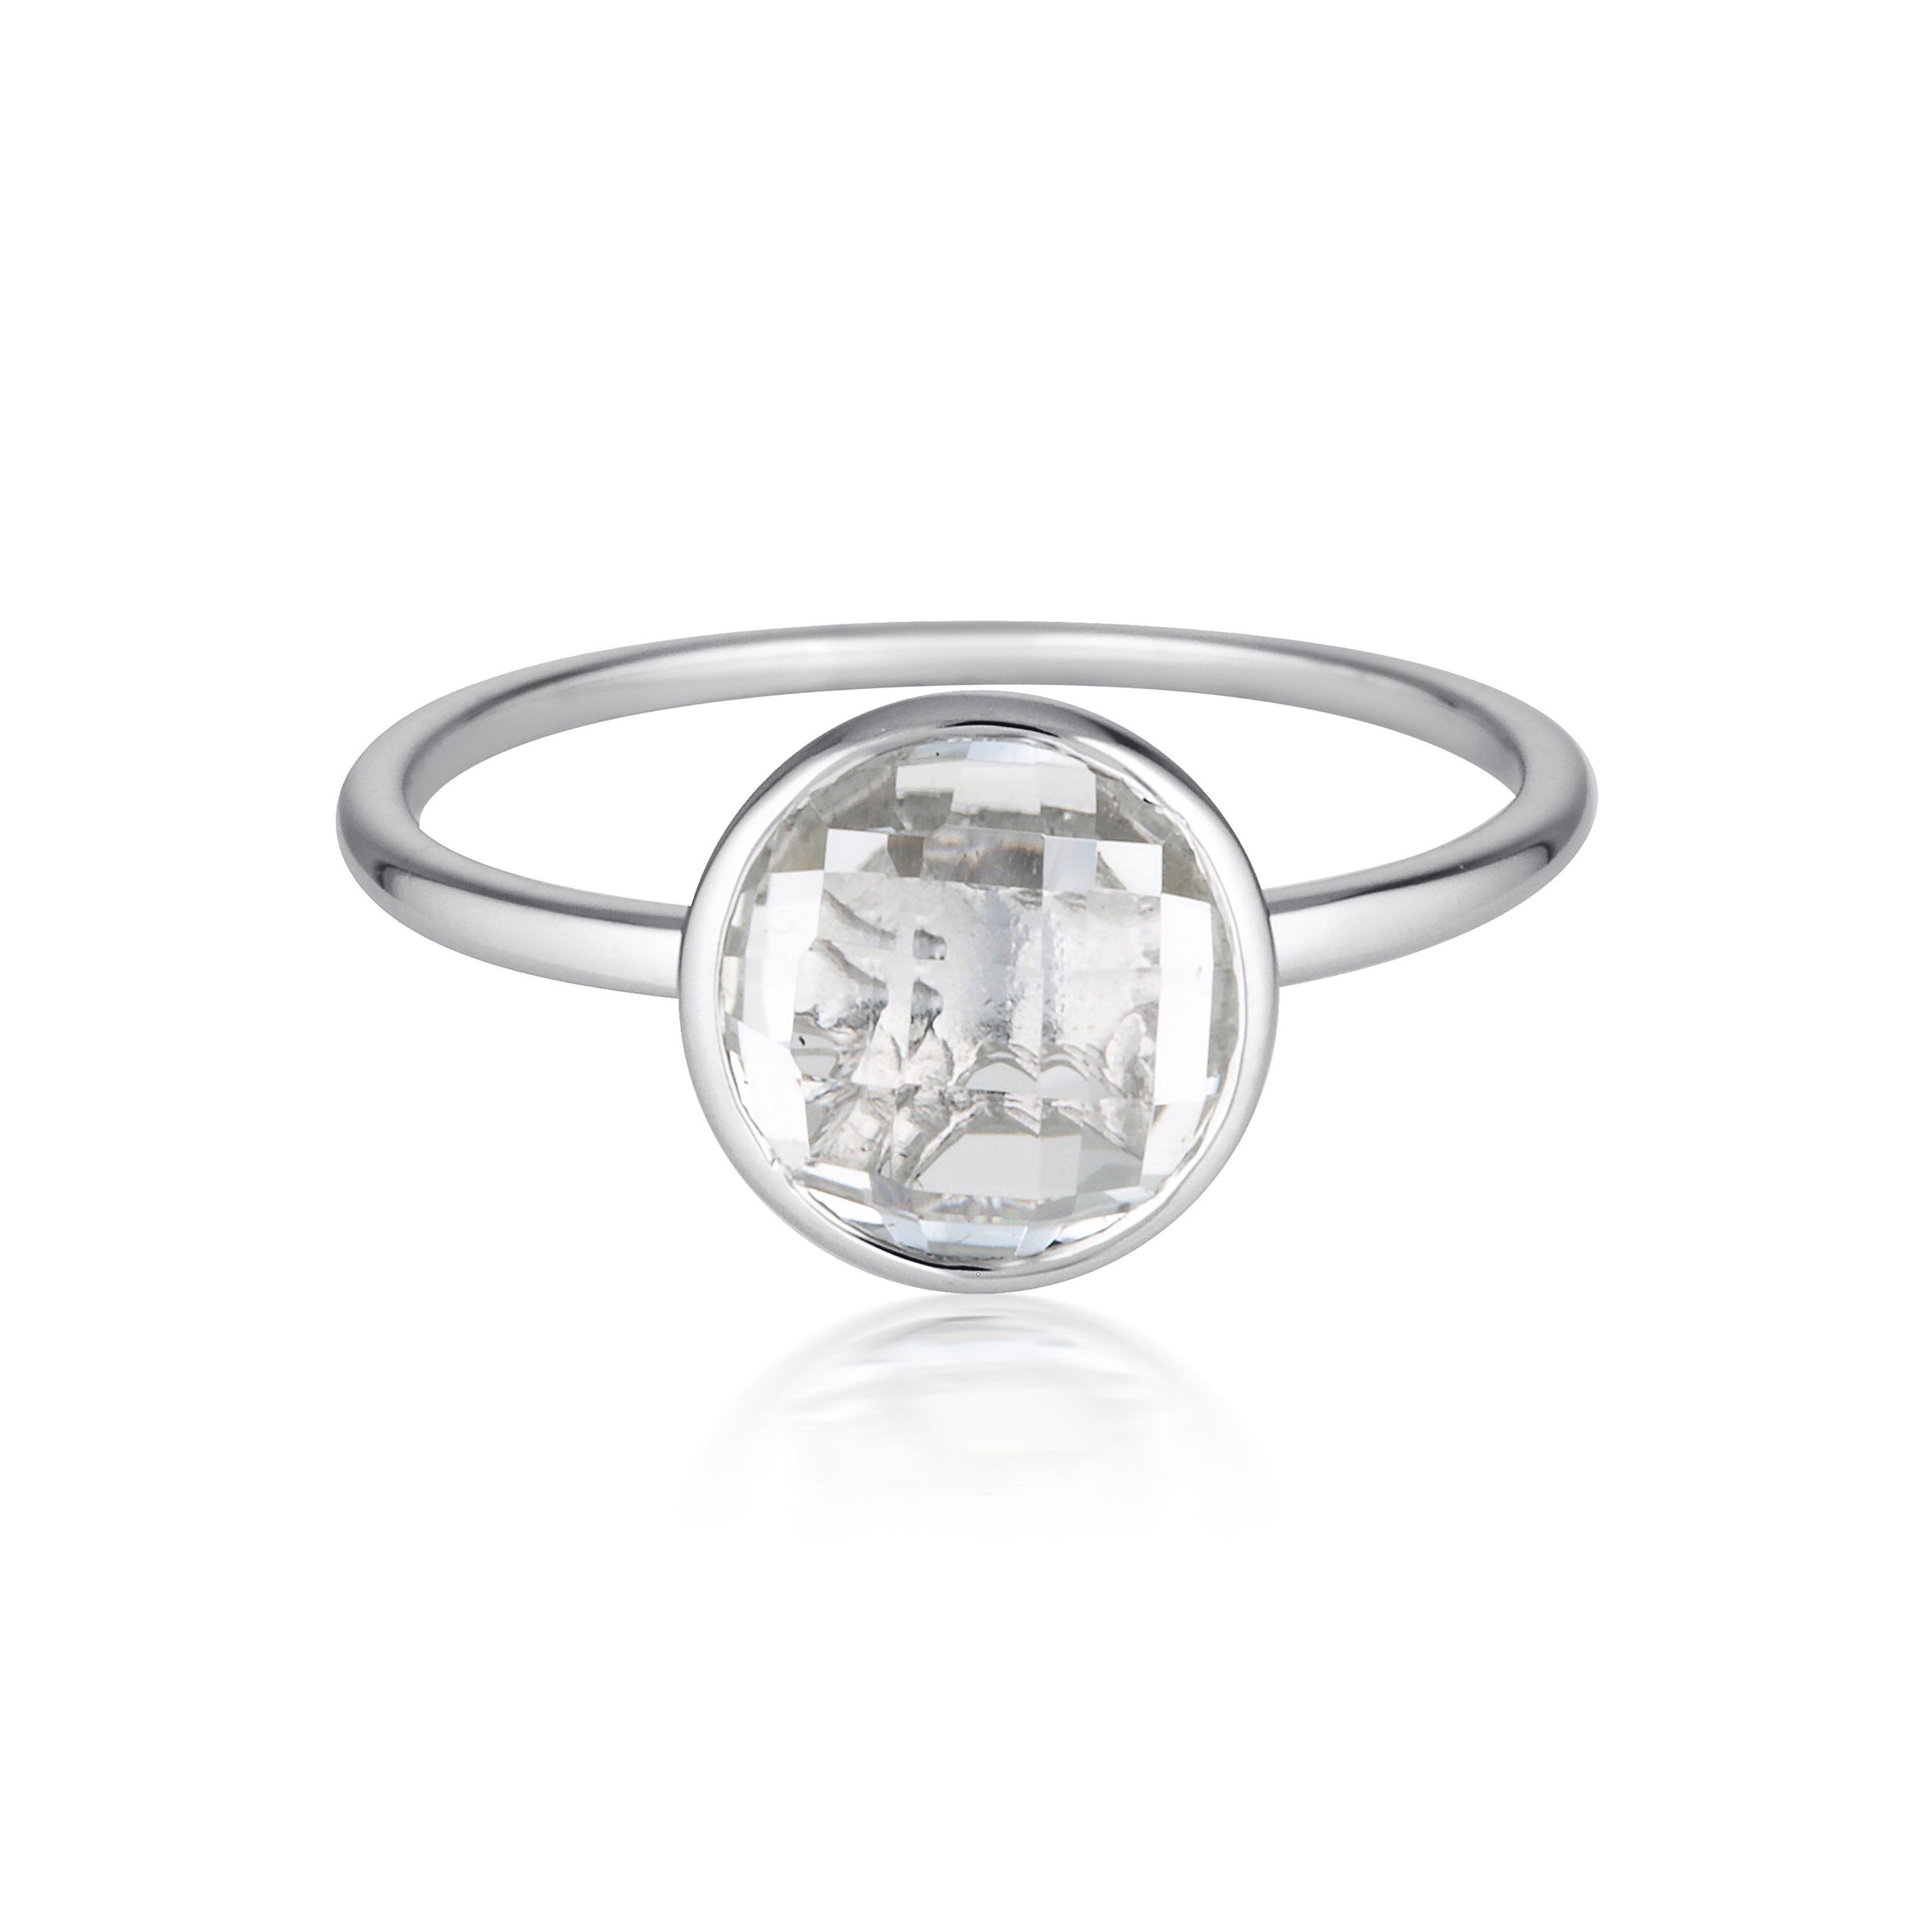 Georgini - Rodos Sterling Silver White Topaz Ring Bevilles Jewellers 7 